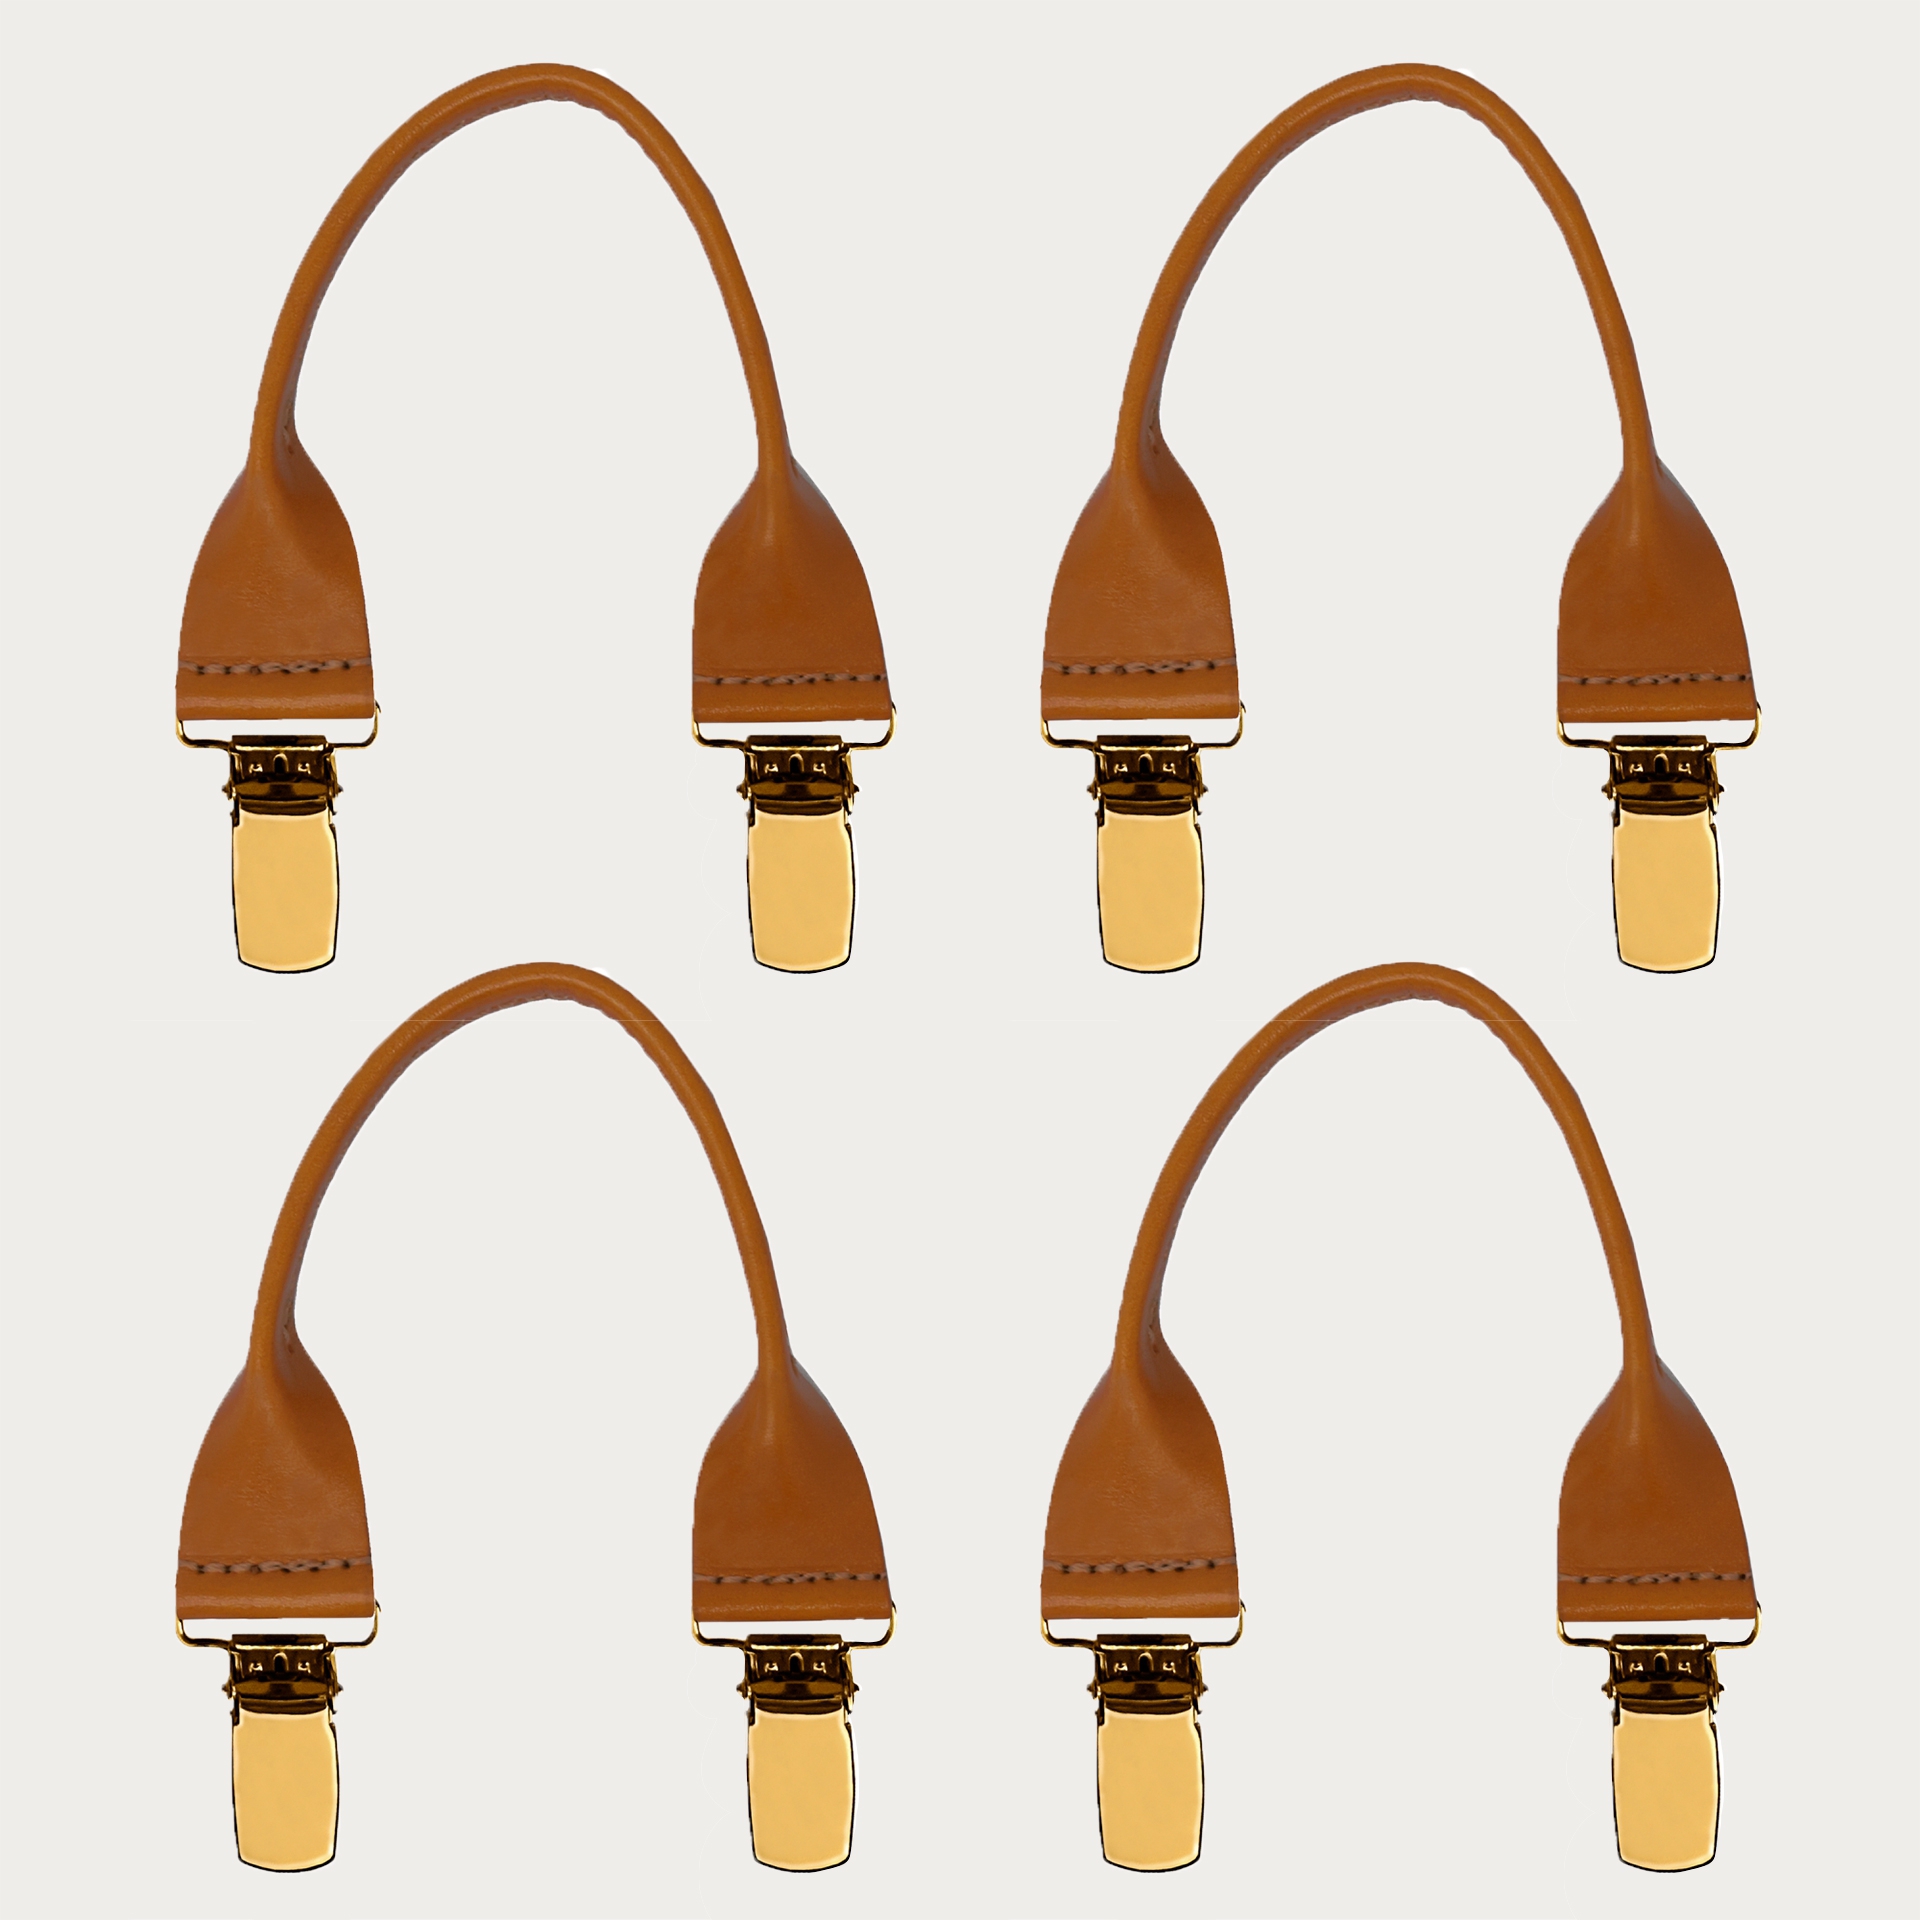 Leather buttonhole braces with gold clips, 4 pieces, tan